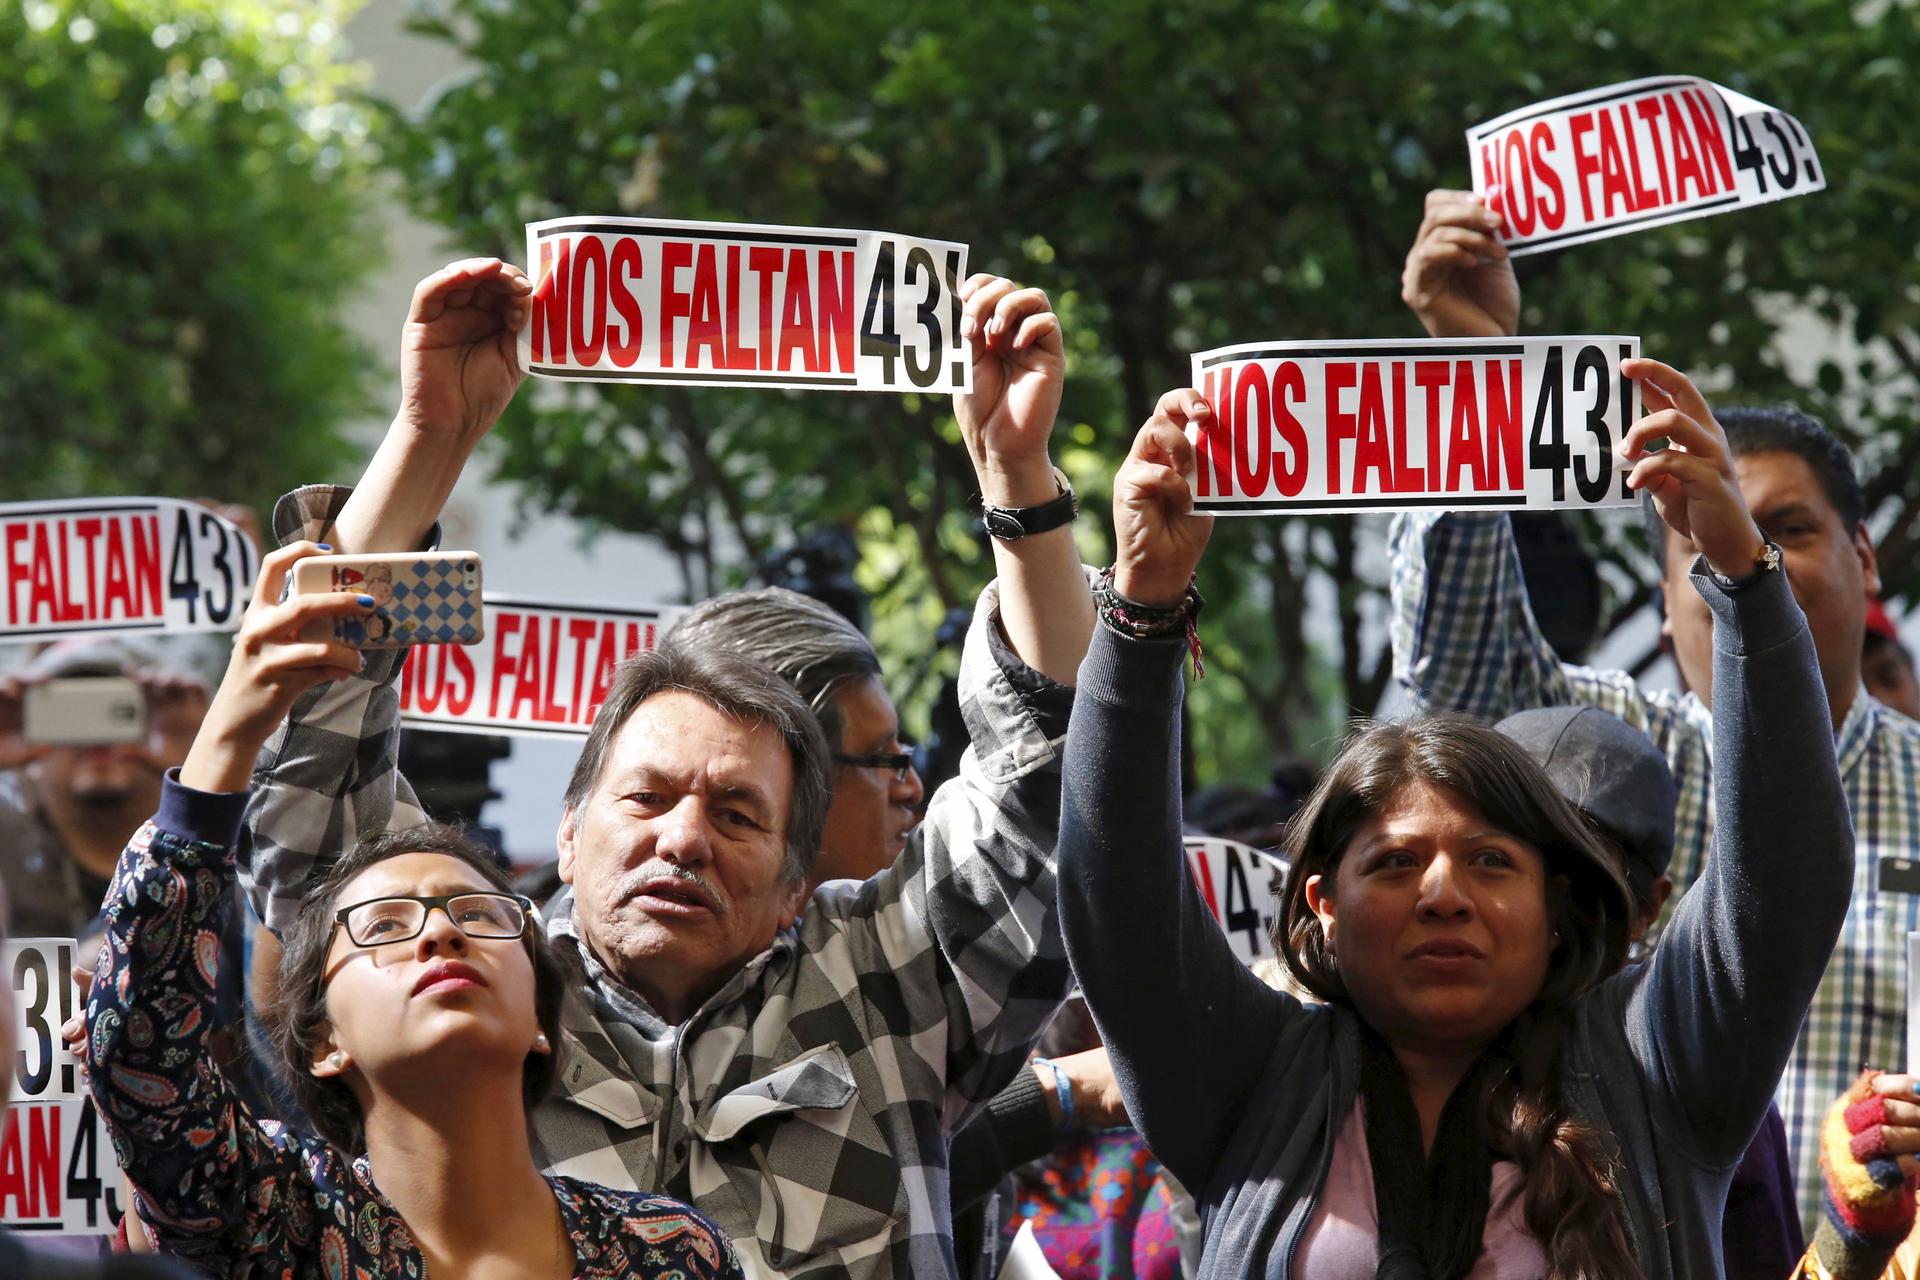 Activists hold signs that read "We are missing 43" during the delivery of the final report of the 43 missing students from the Ayotzinapa teacher's training college by members of the Inter-American Commission on Human Rights at Claustro de Sor Juana Unive